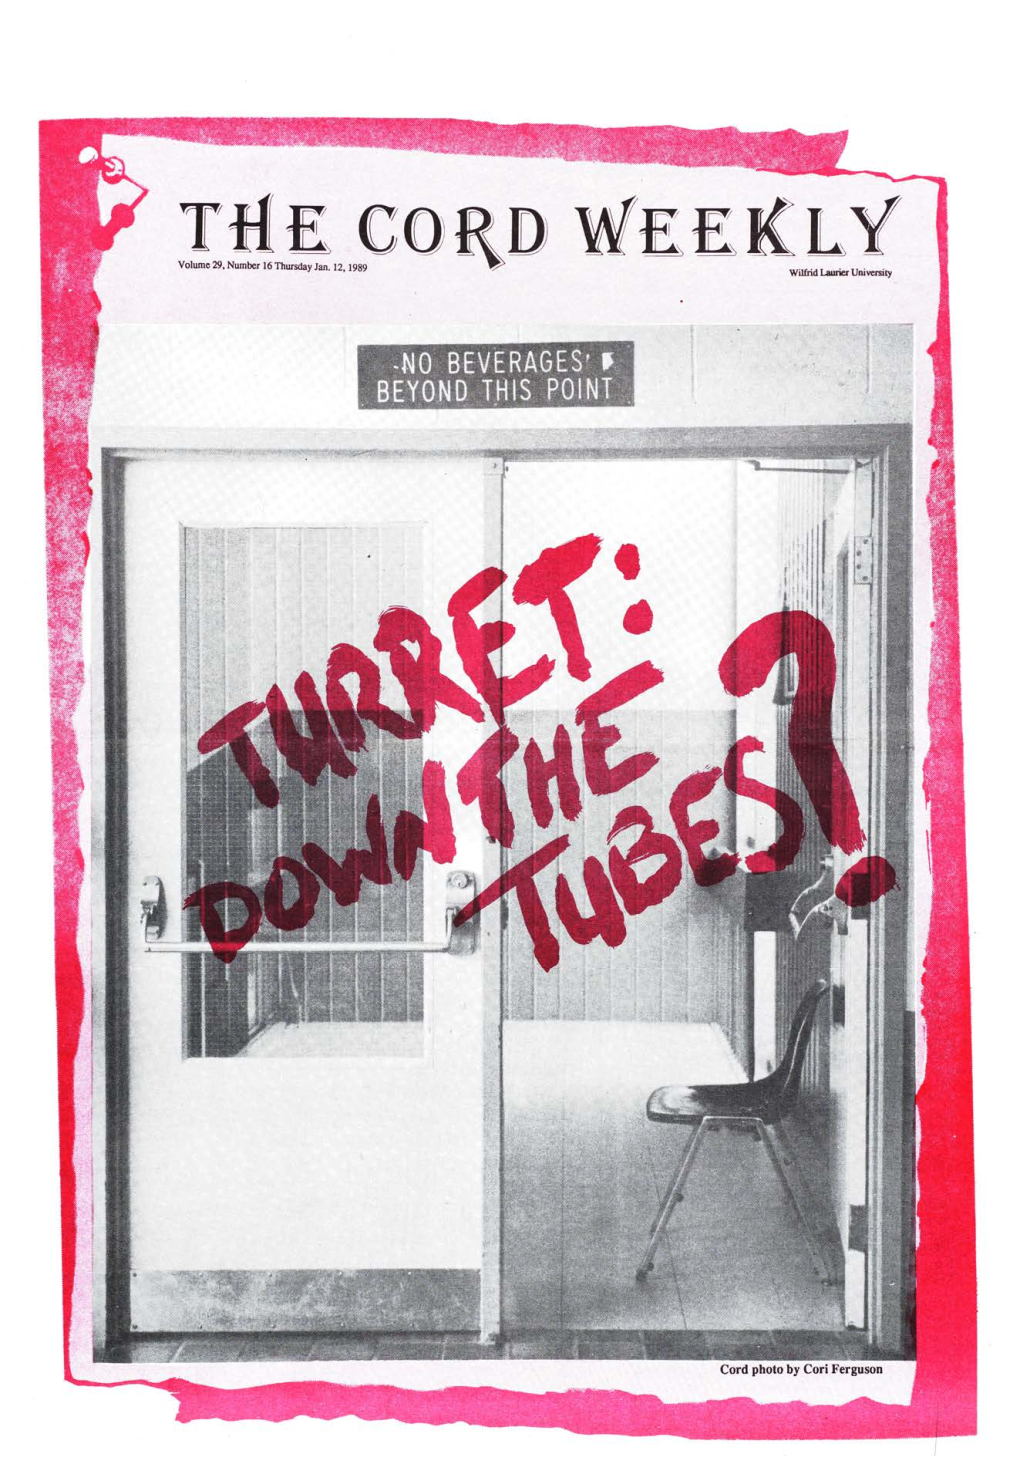 The Cord Weekly (February 12, 1989)